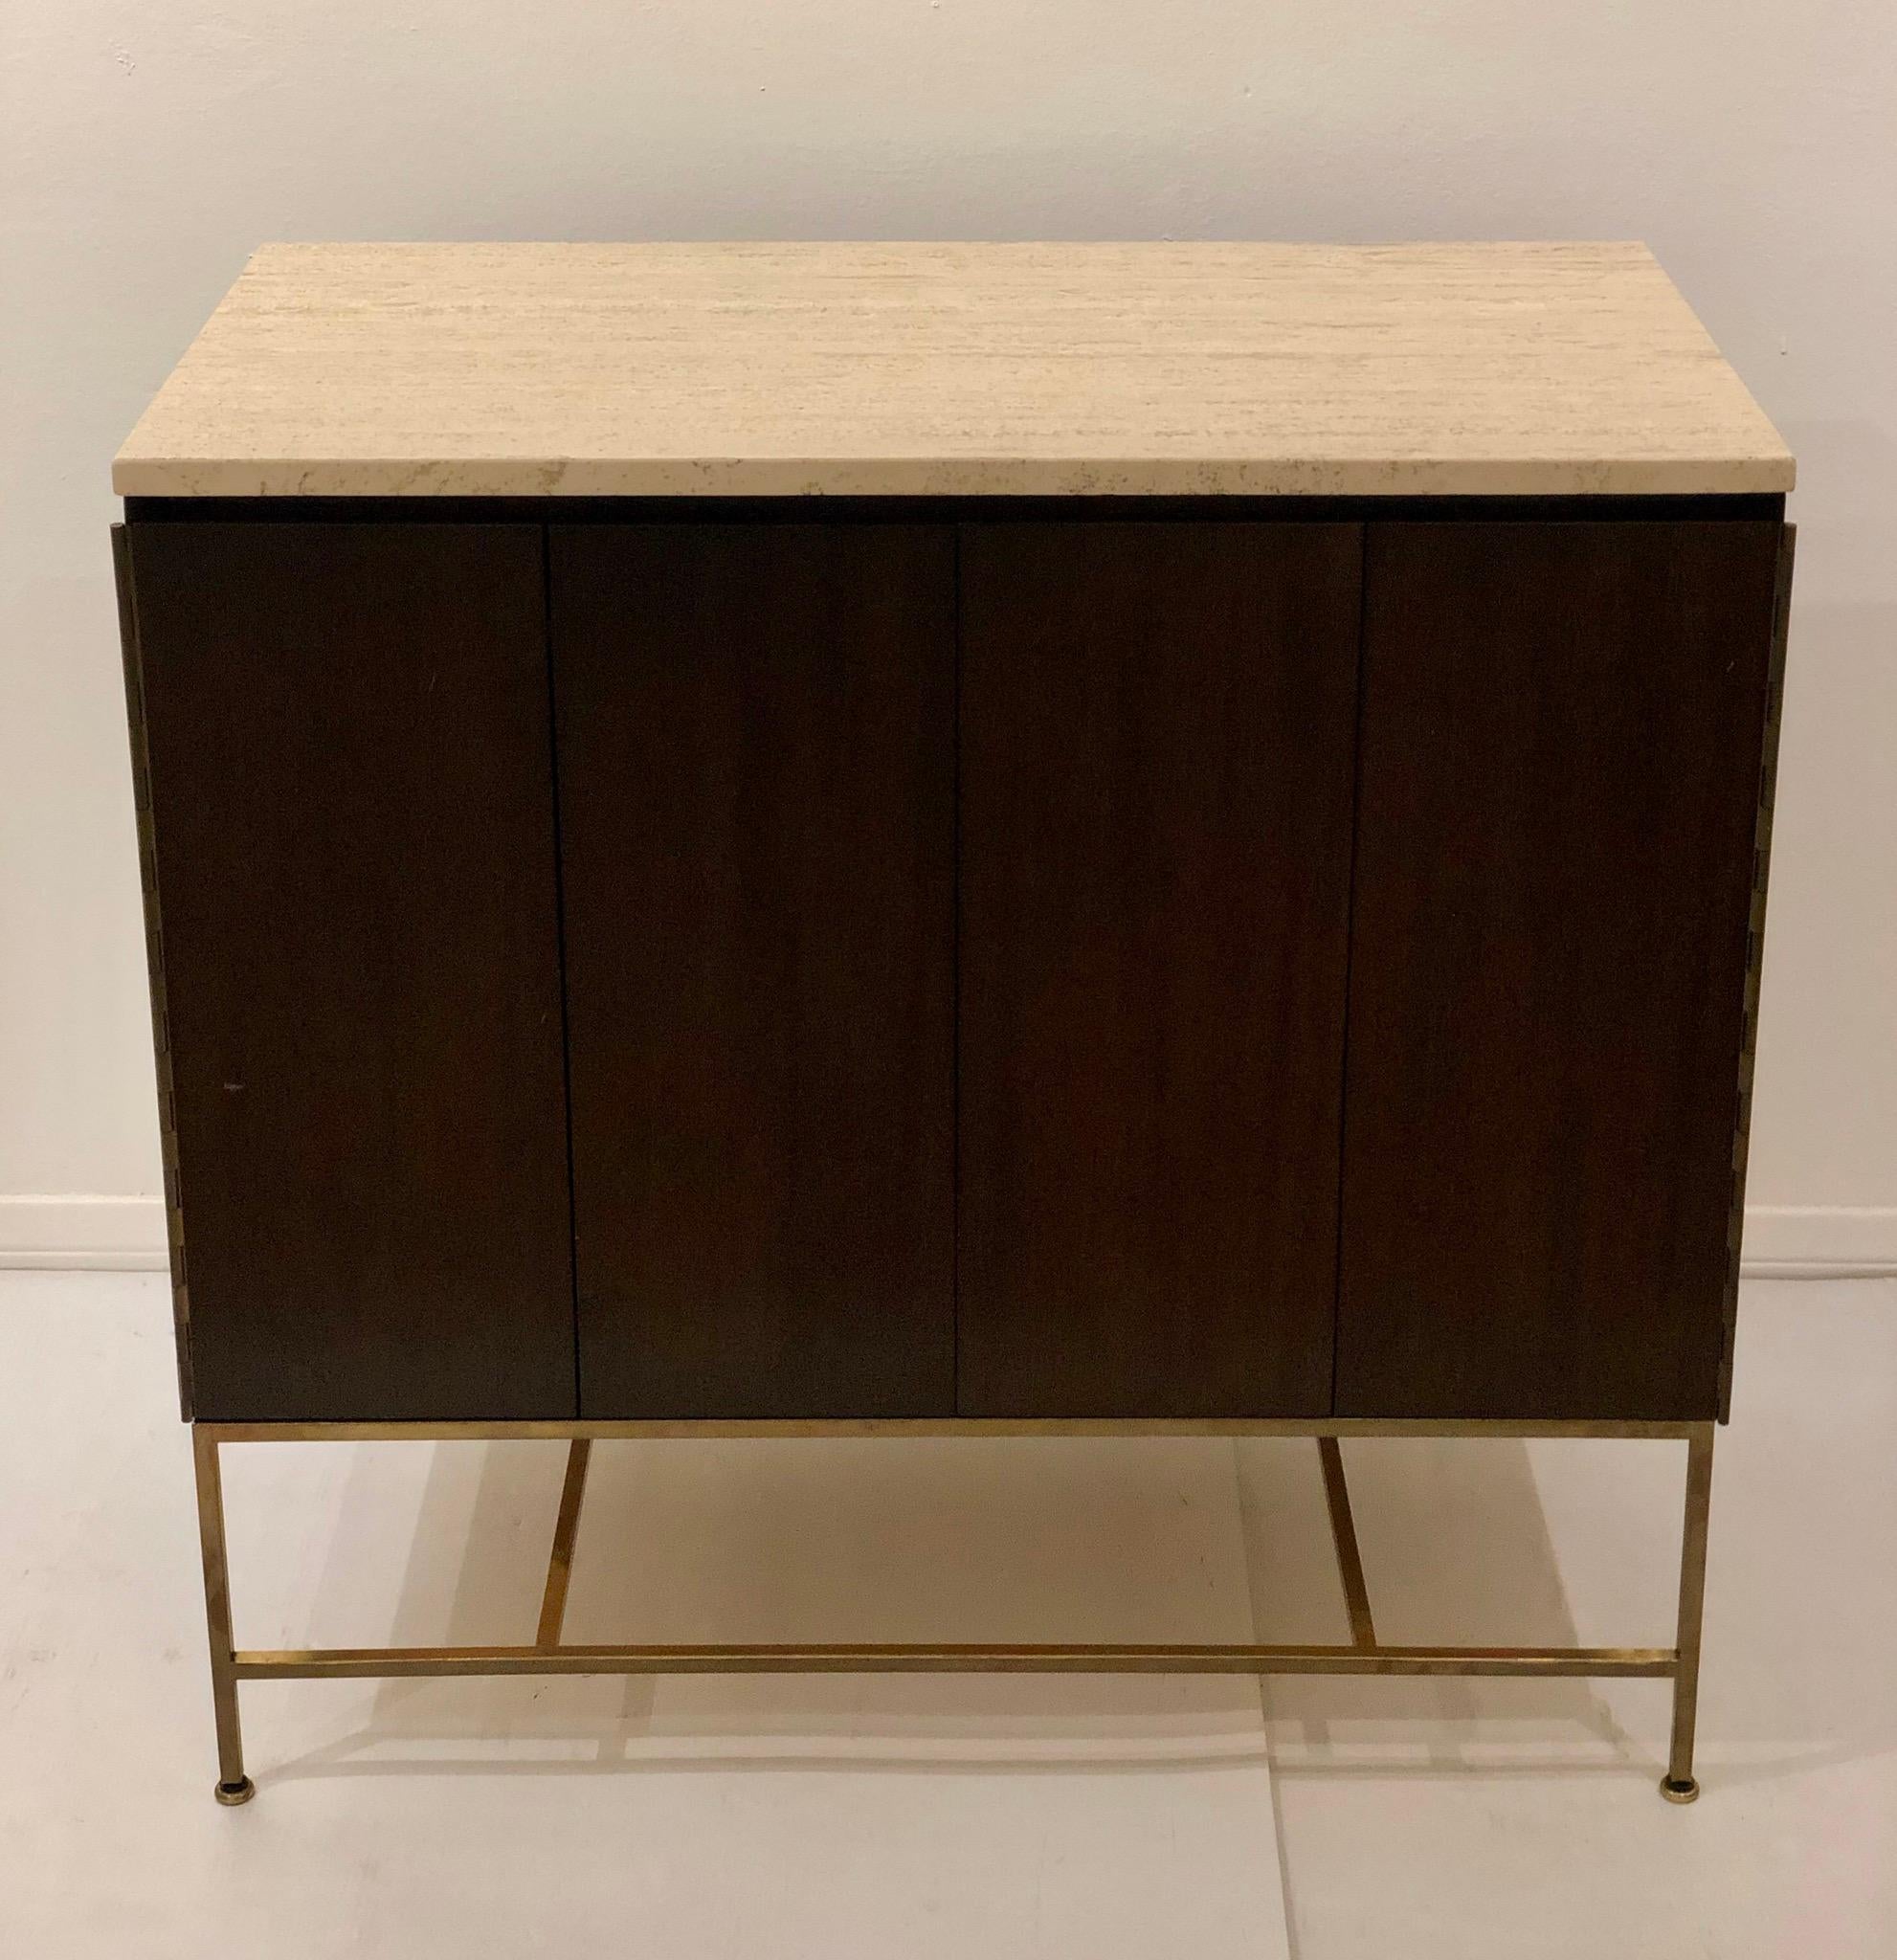 American Mid-Century Modern, Elegant cabinet dresser designed by Paul McCobb, with folding doors and 4 drawers, refinished in chocolate finish, with Travertine top and brass base, this beauty its hard to find part of the Calvin group, circa 1950s.